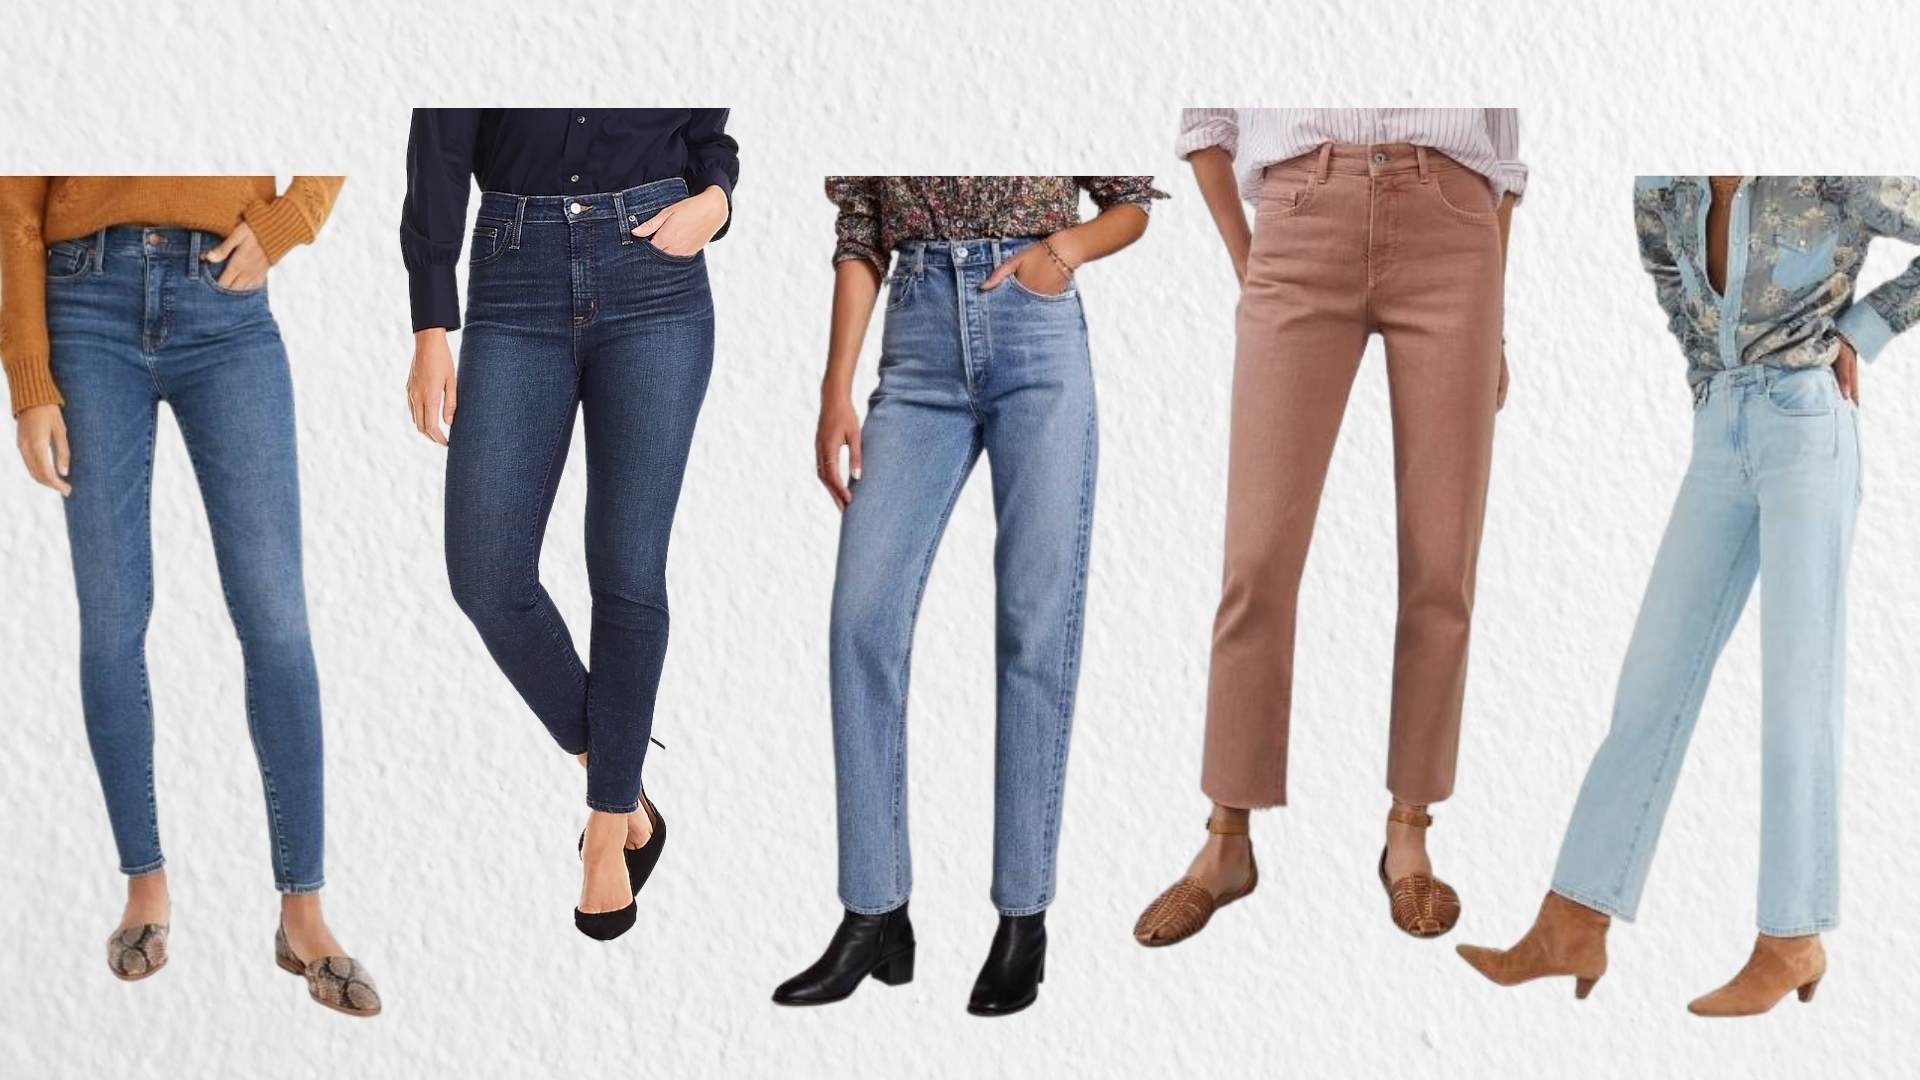 35 Best Jeans for Women Over 50 in 2023 - Woman's World